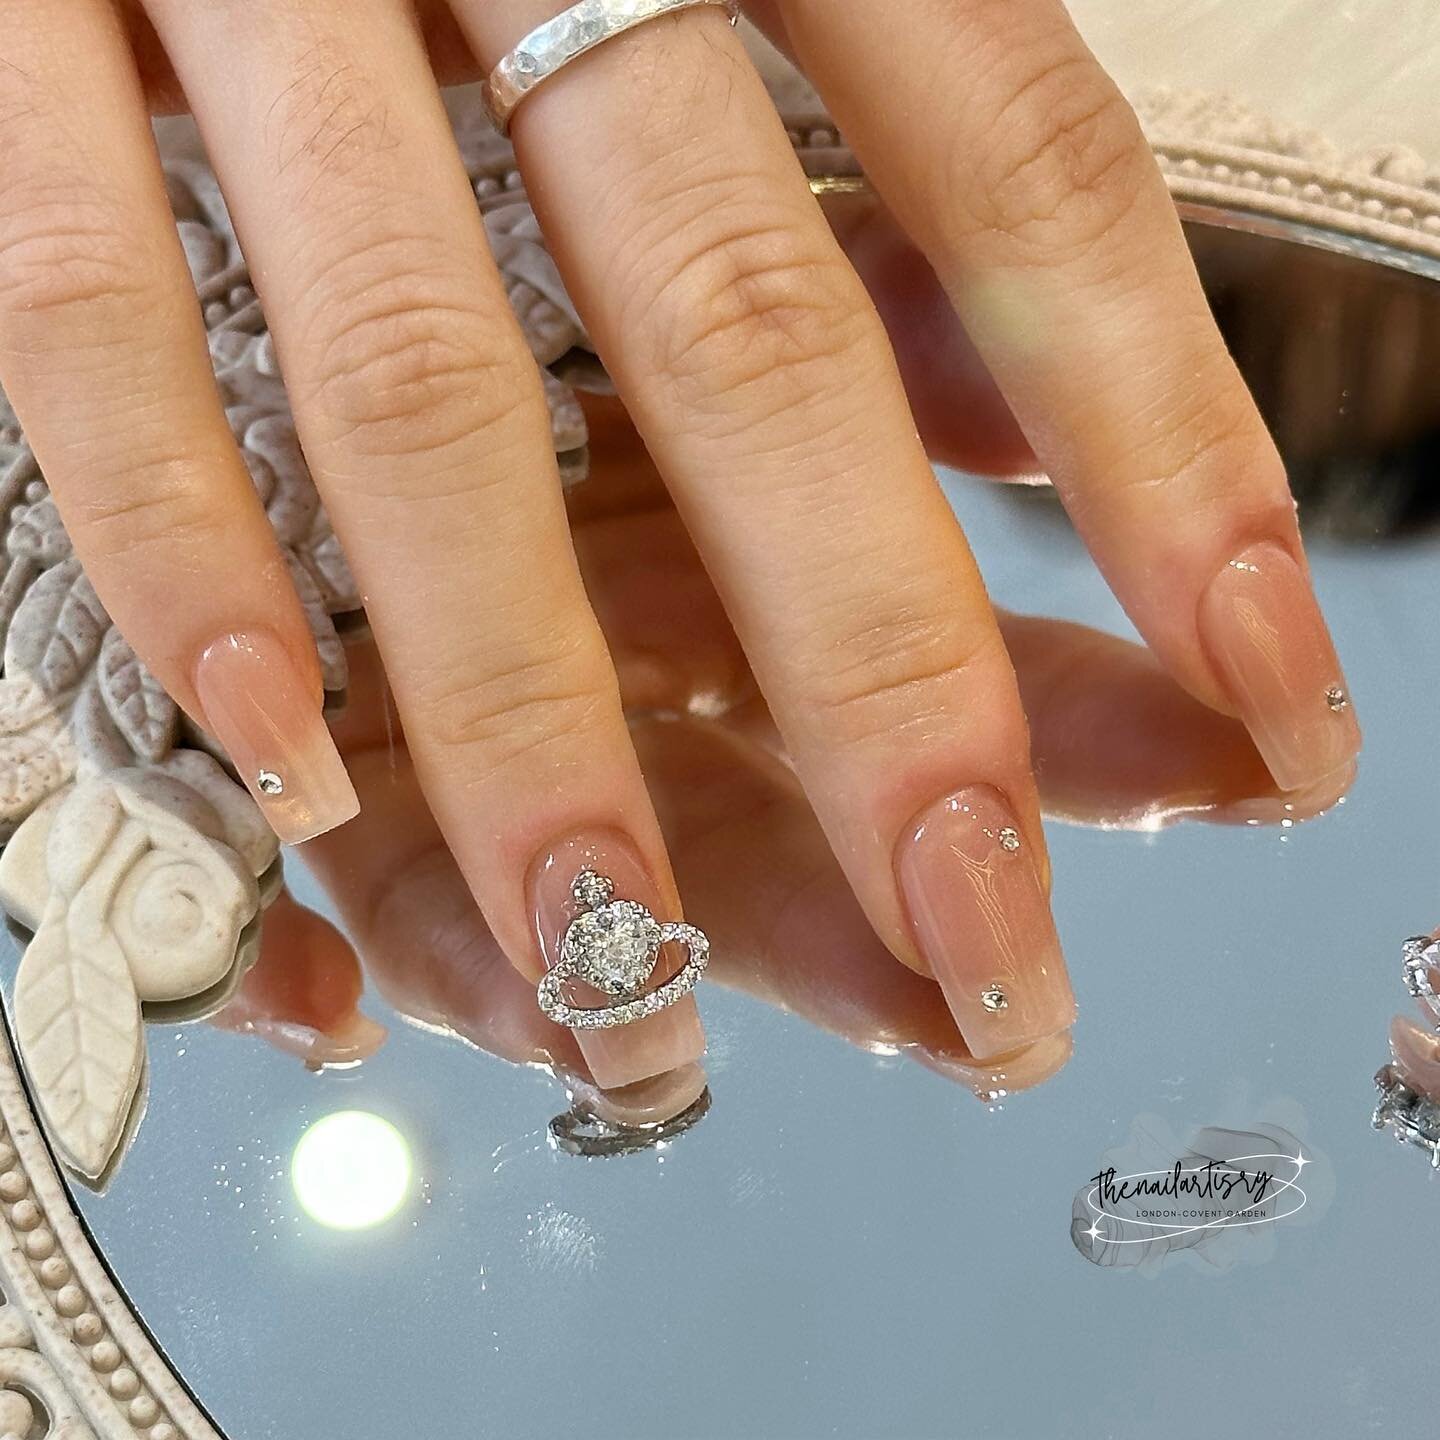 𐐪𐑂 ♡ 𐐪𐑂 real life pretty , pretty in real life 𐐪𐑂 ♡ 𐐪𐑂 

💟 If you are looking for a sign to get your nails charms, here it is ✨ we have the cutest charms in London 🫶🏻

📲 To book: please select the treatments that you love &amp; request fo